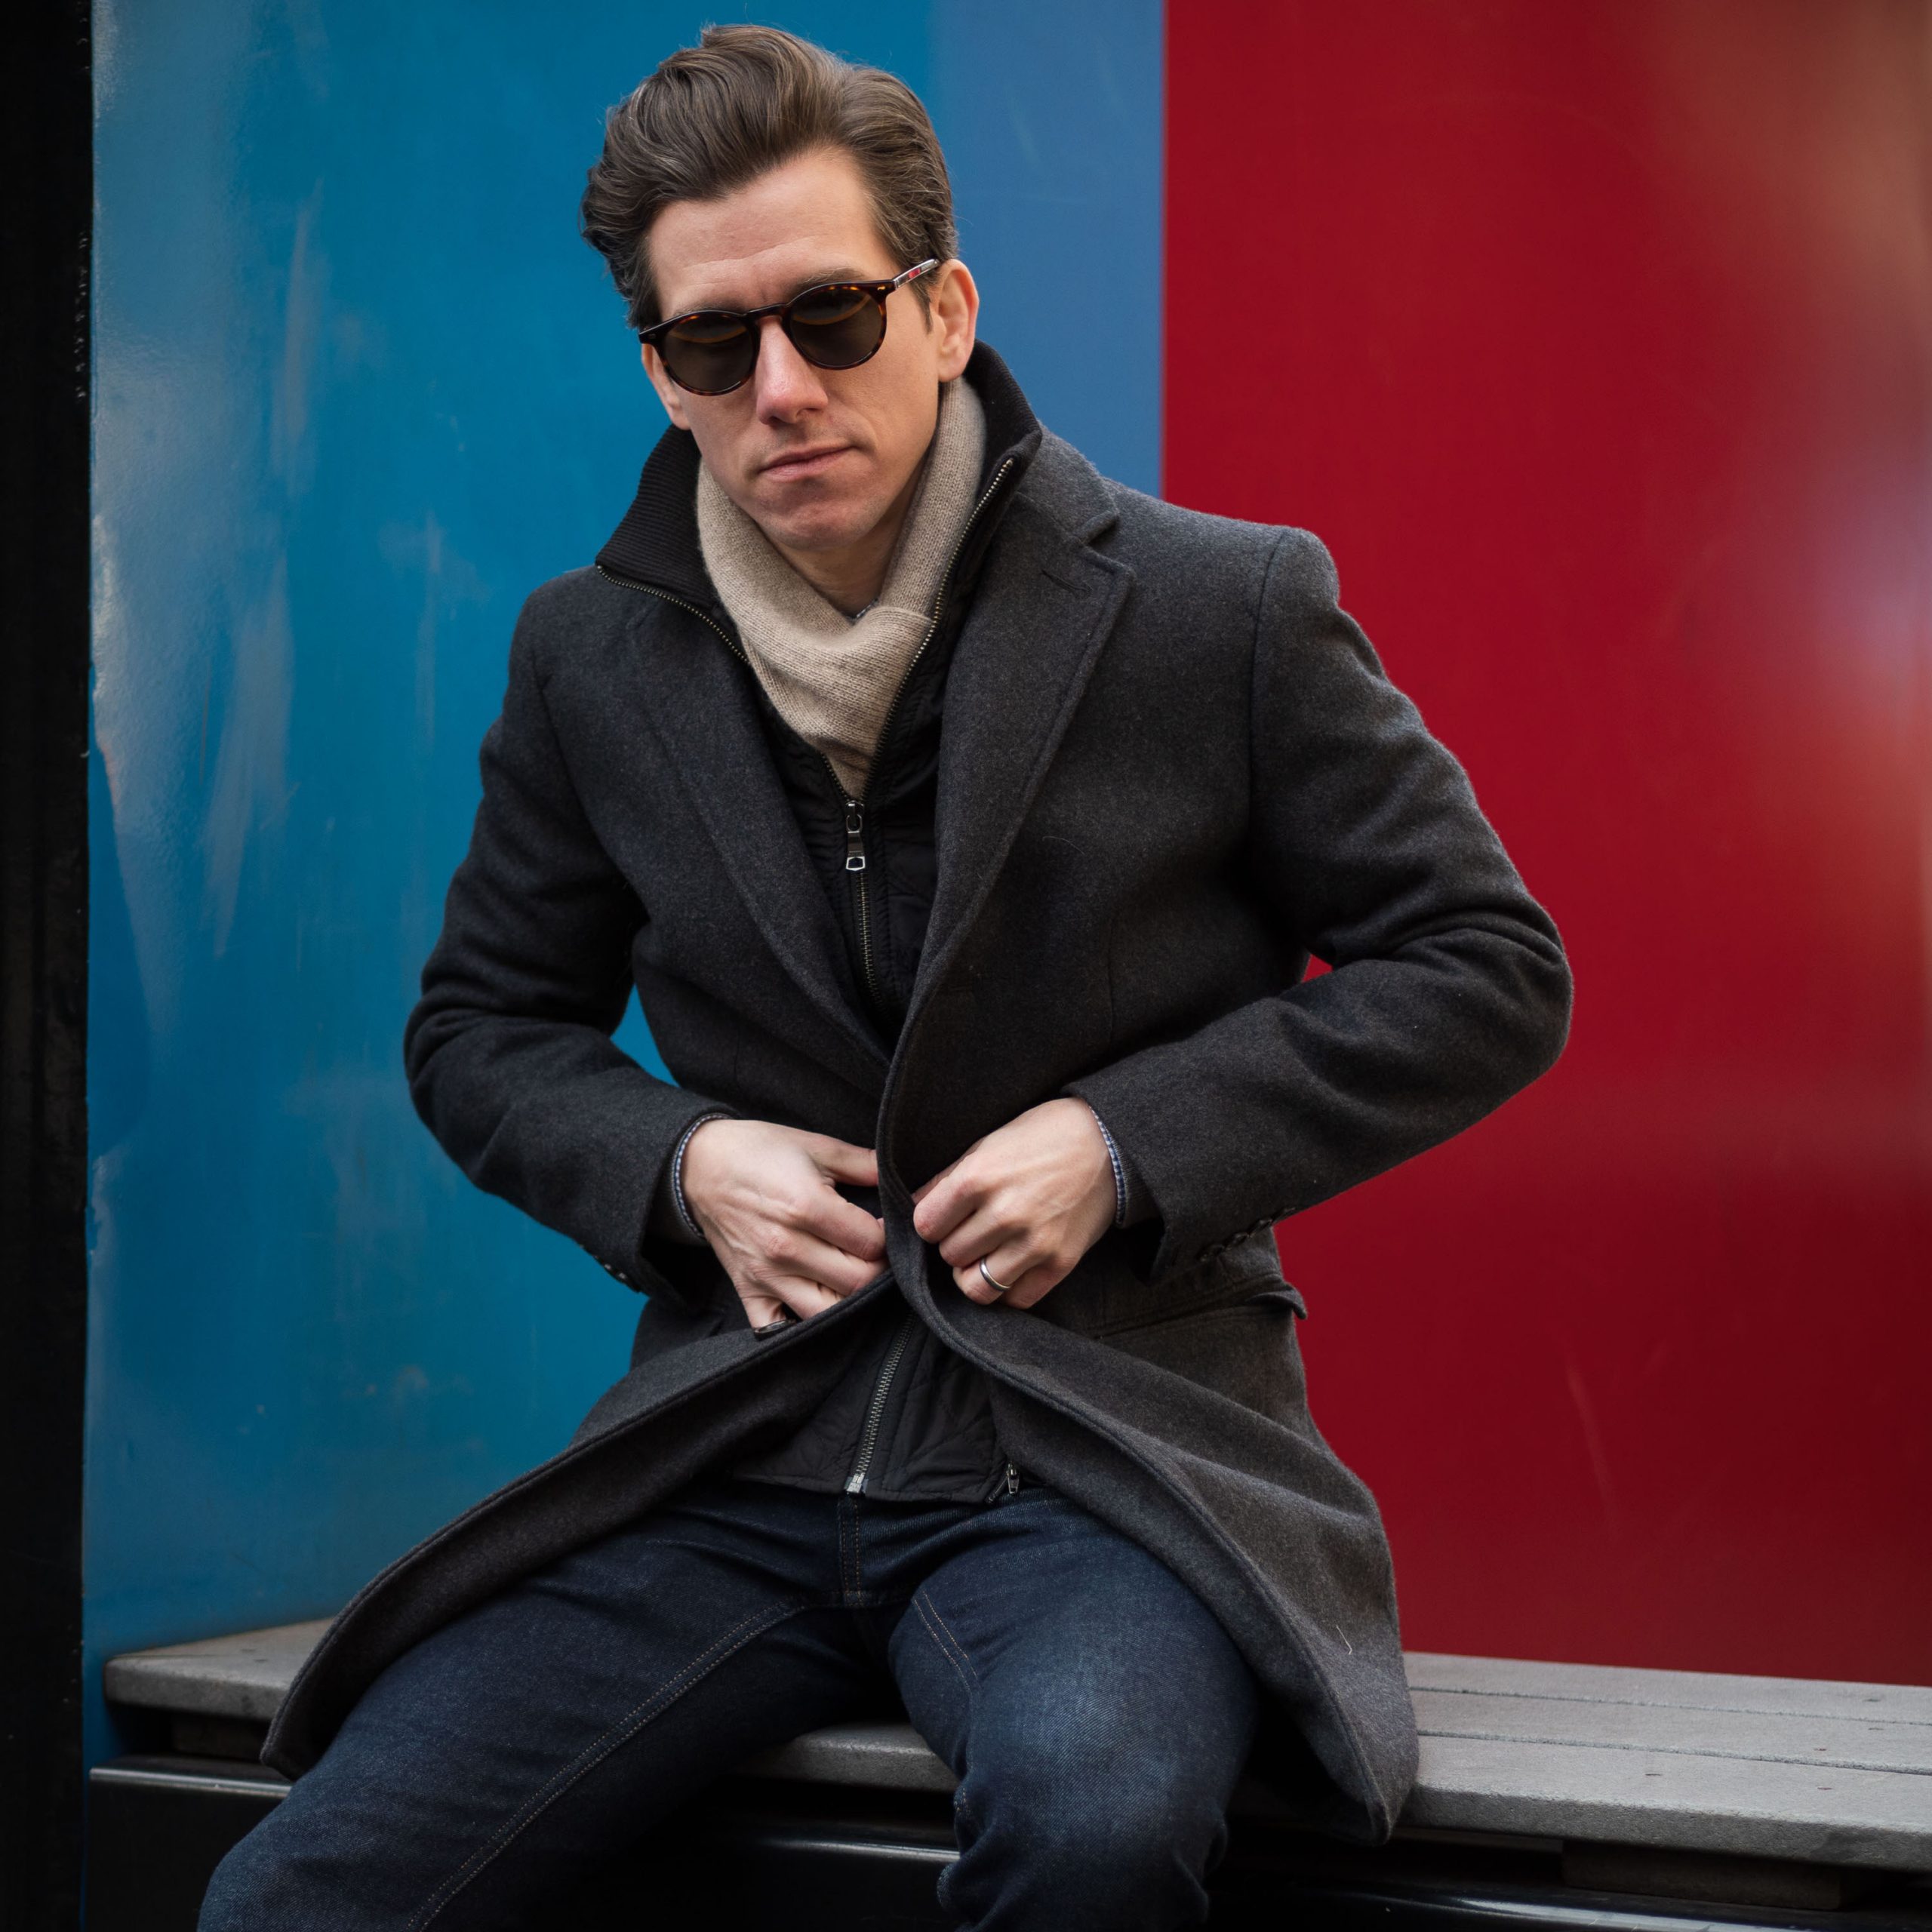 Outerwear for shorter guys scaled